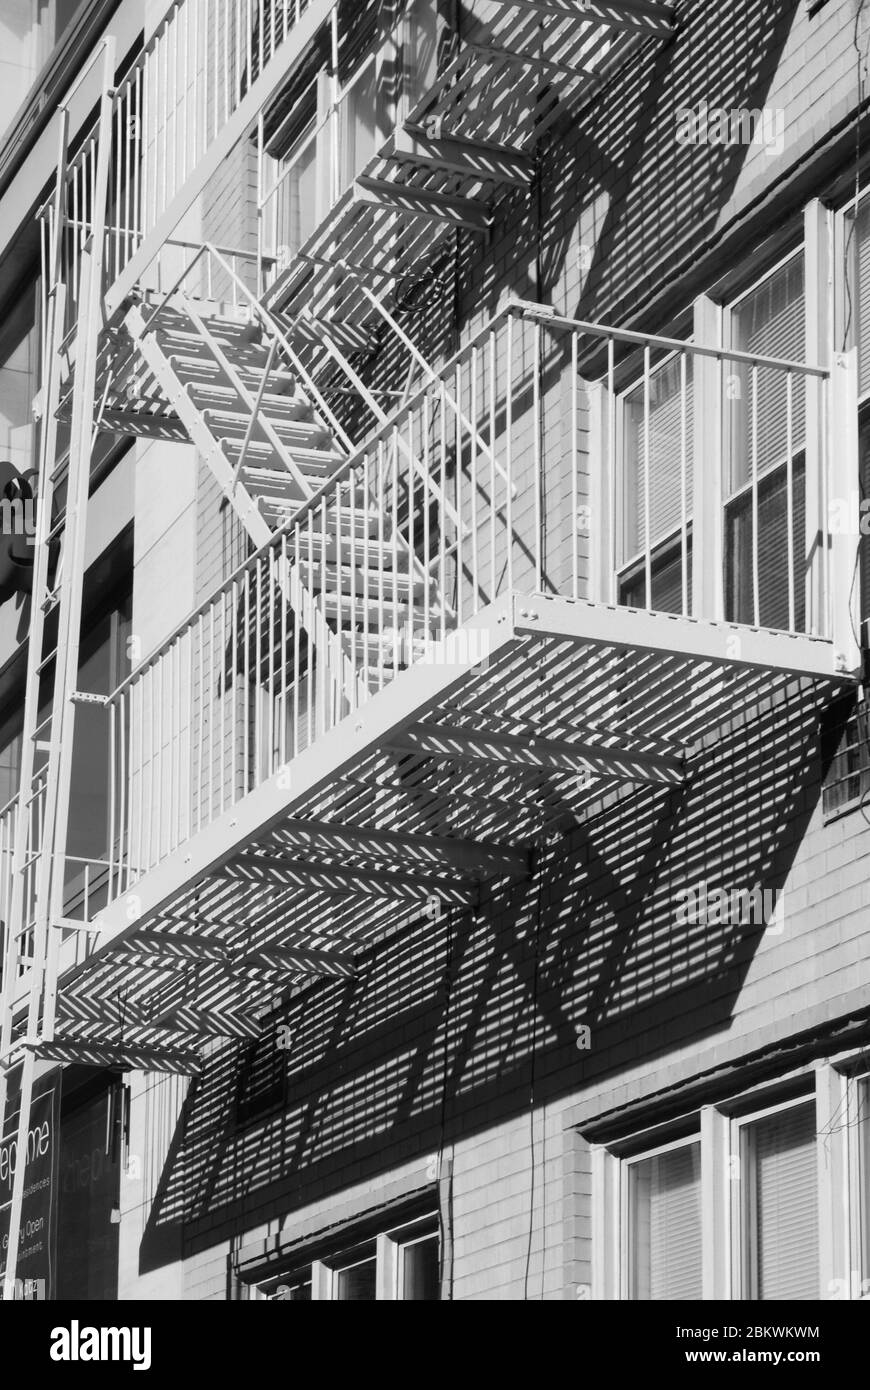 Fire Escapes Stairs Balconies Steps Manhattan New York City, United States Stock Photo